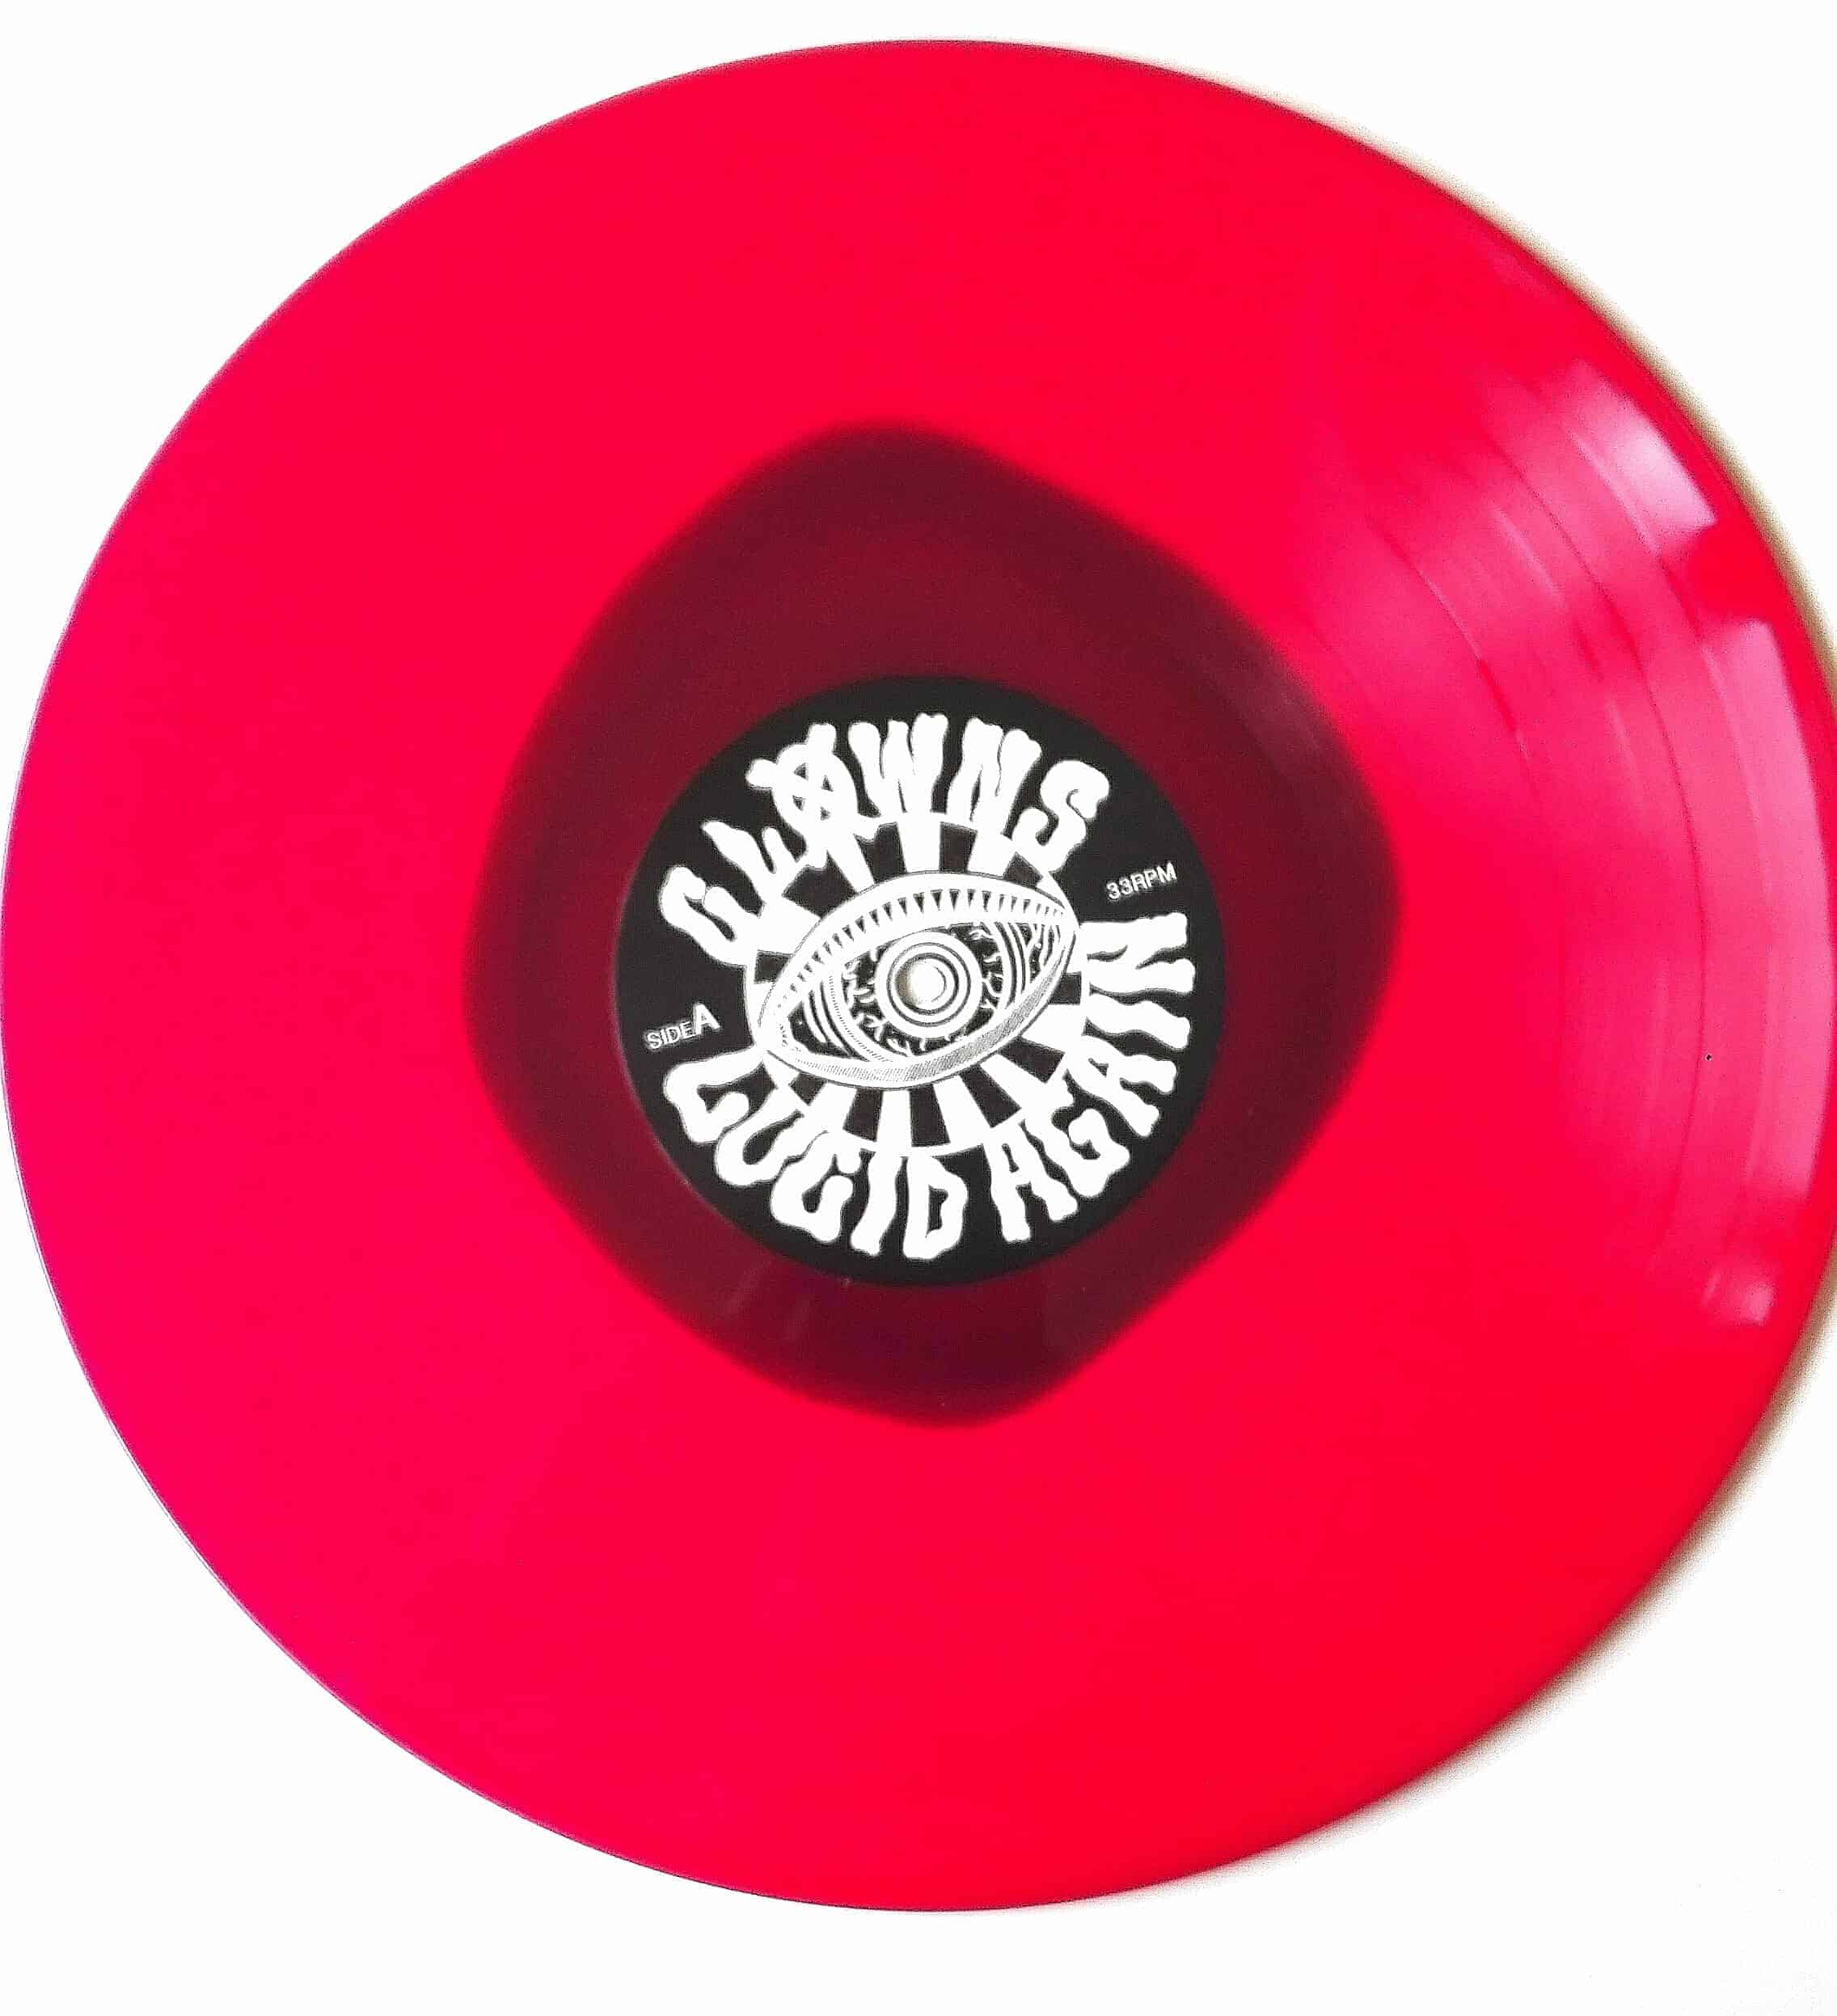 Clowns – Lucid Again LP/CD 1st press: 800 LPs, 150 crystal clear / 650 white (SOLD OUT) 2nd press: 500 copies red/clear swirl (SOLD OUT) 3rd press: 500 copies purple in red (SOLD OUT) 4th press: 500 copies crystal clear with black dot 1000 cds SOLD OUT  